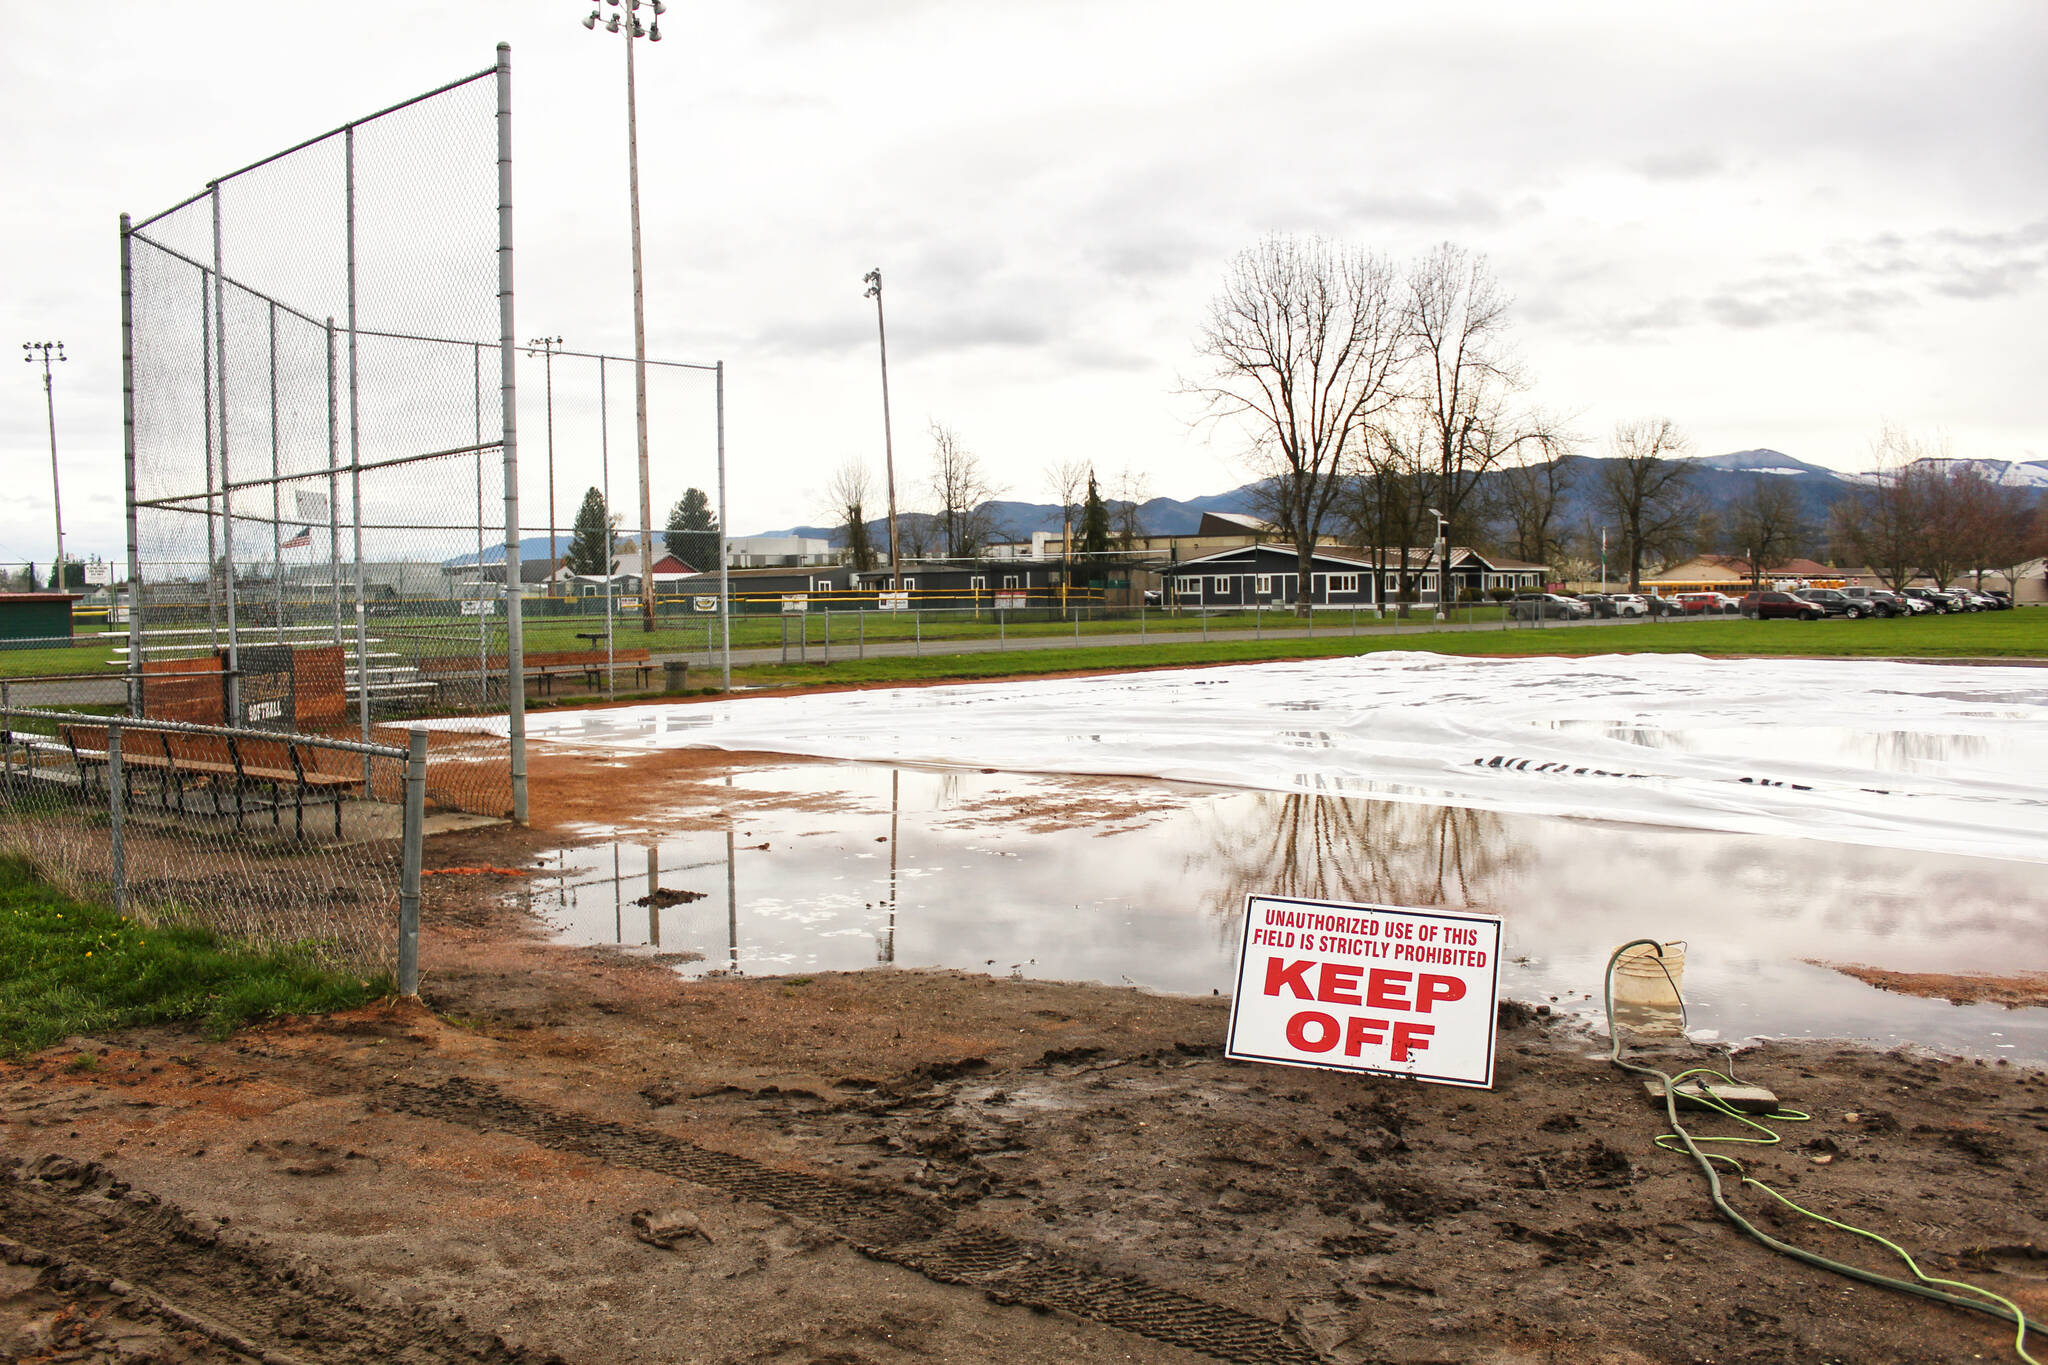 Enumclaw softball’s Field #3 has been unusable for two years, either due to rain or repairs from the district to improve drainage. Photo by Ray Miller-Still